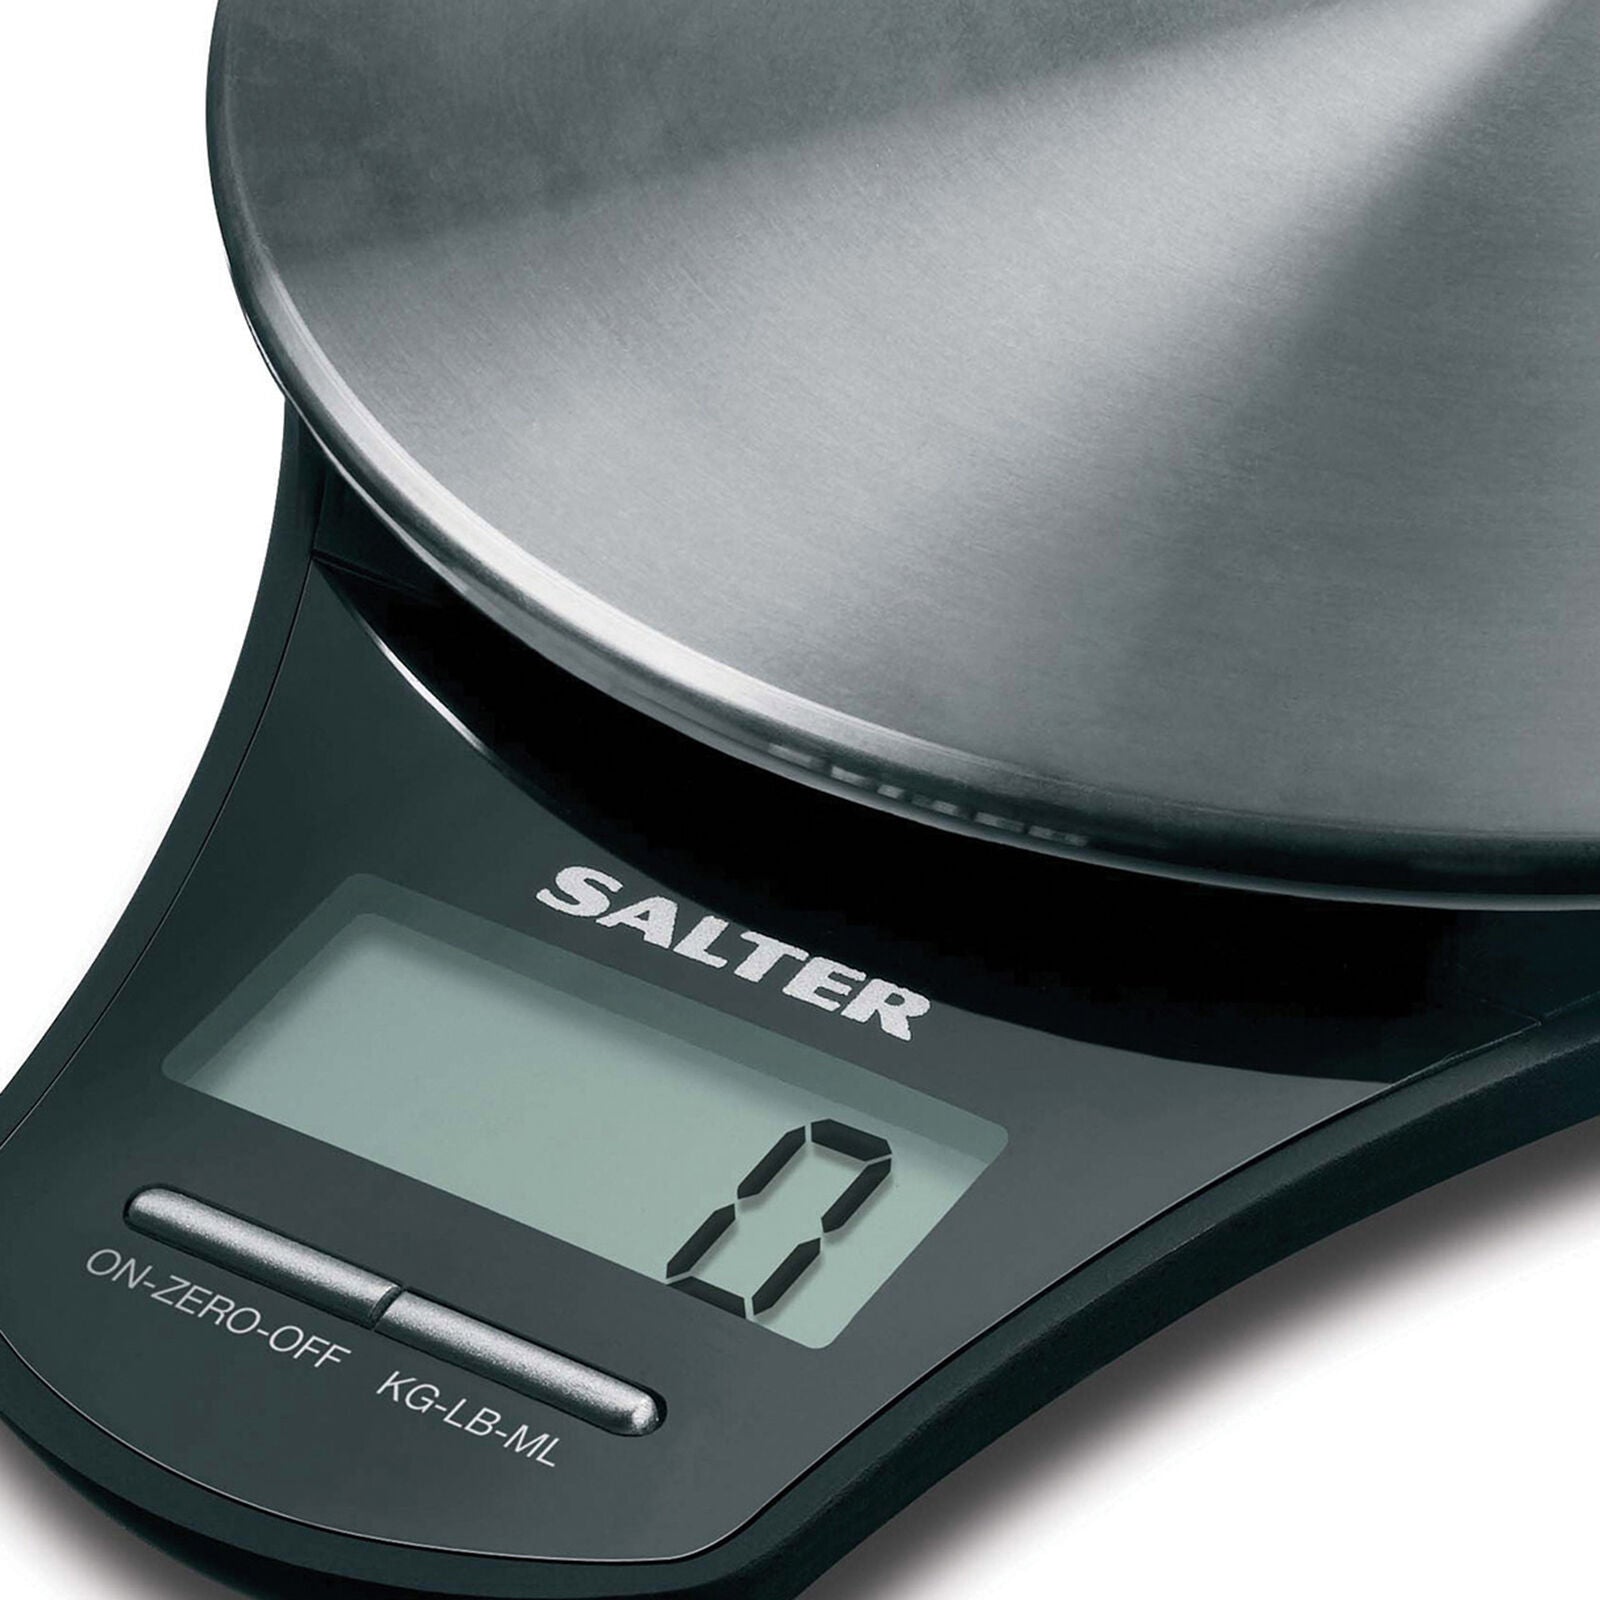 Electronic Kitchen Scale - Black & Silver ColorCan Holds 5 KG